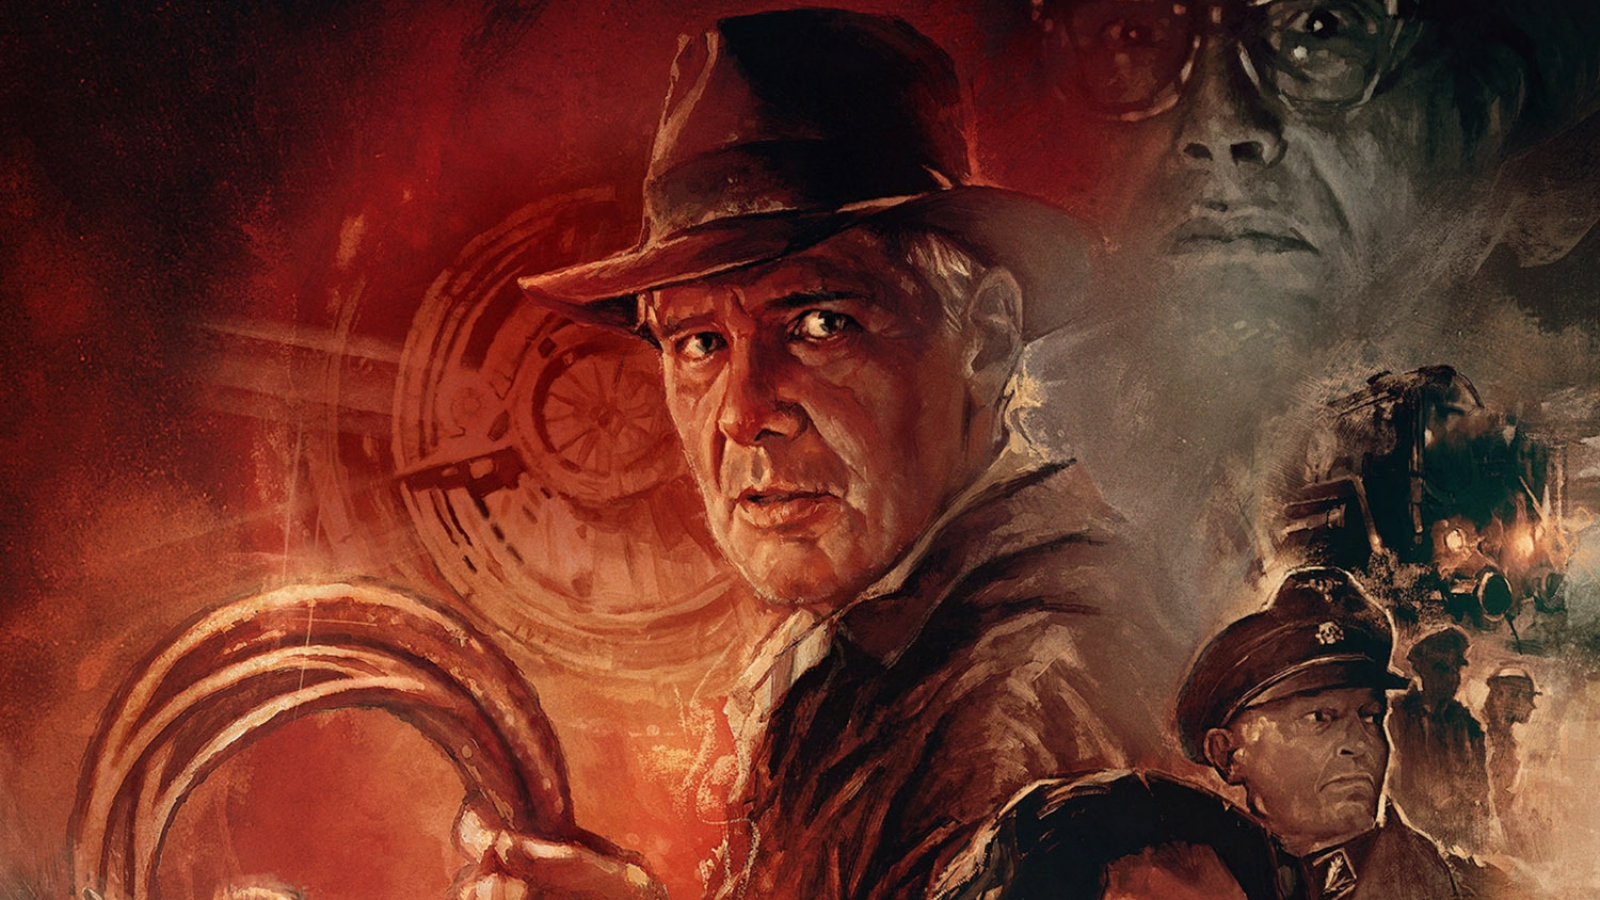 Harrison Ford on Exiting Indiana Jones: ‘It’s Time for Me to Grow Up’